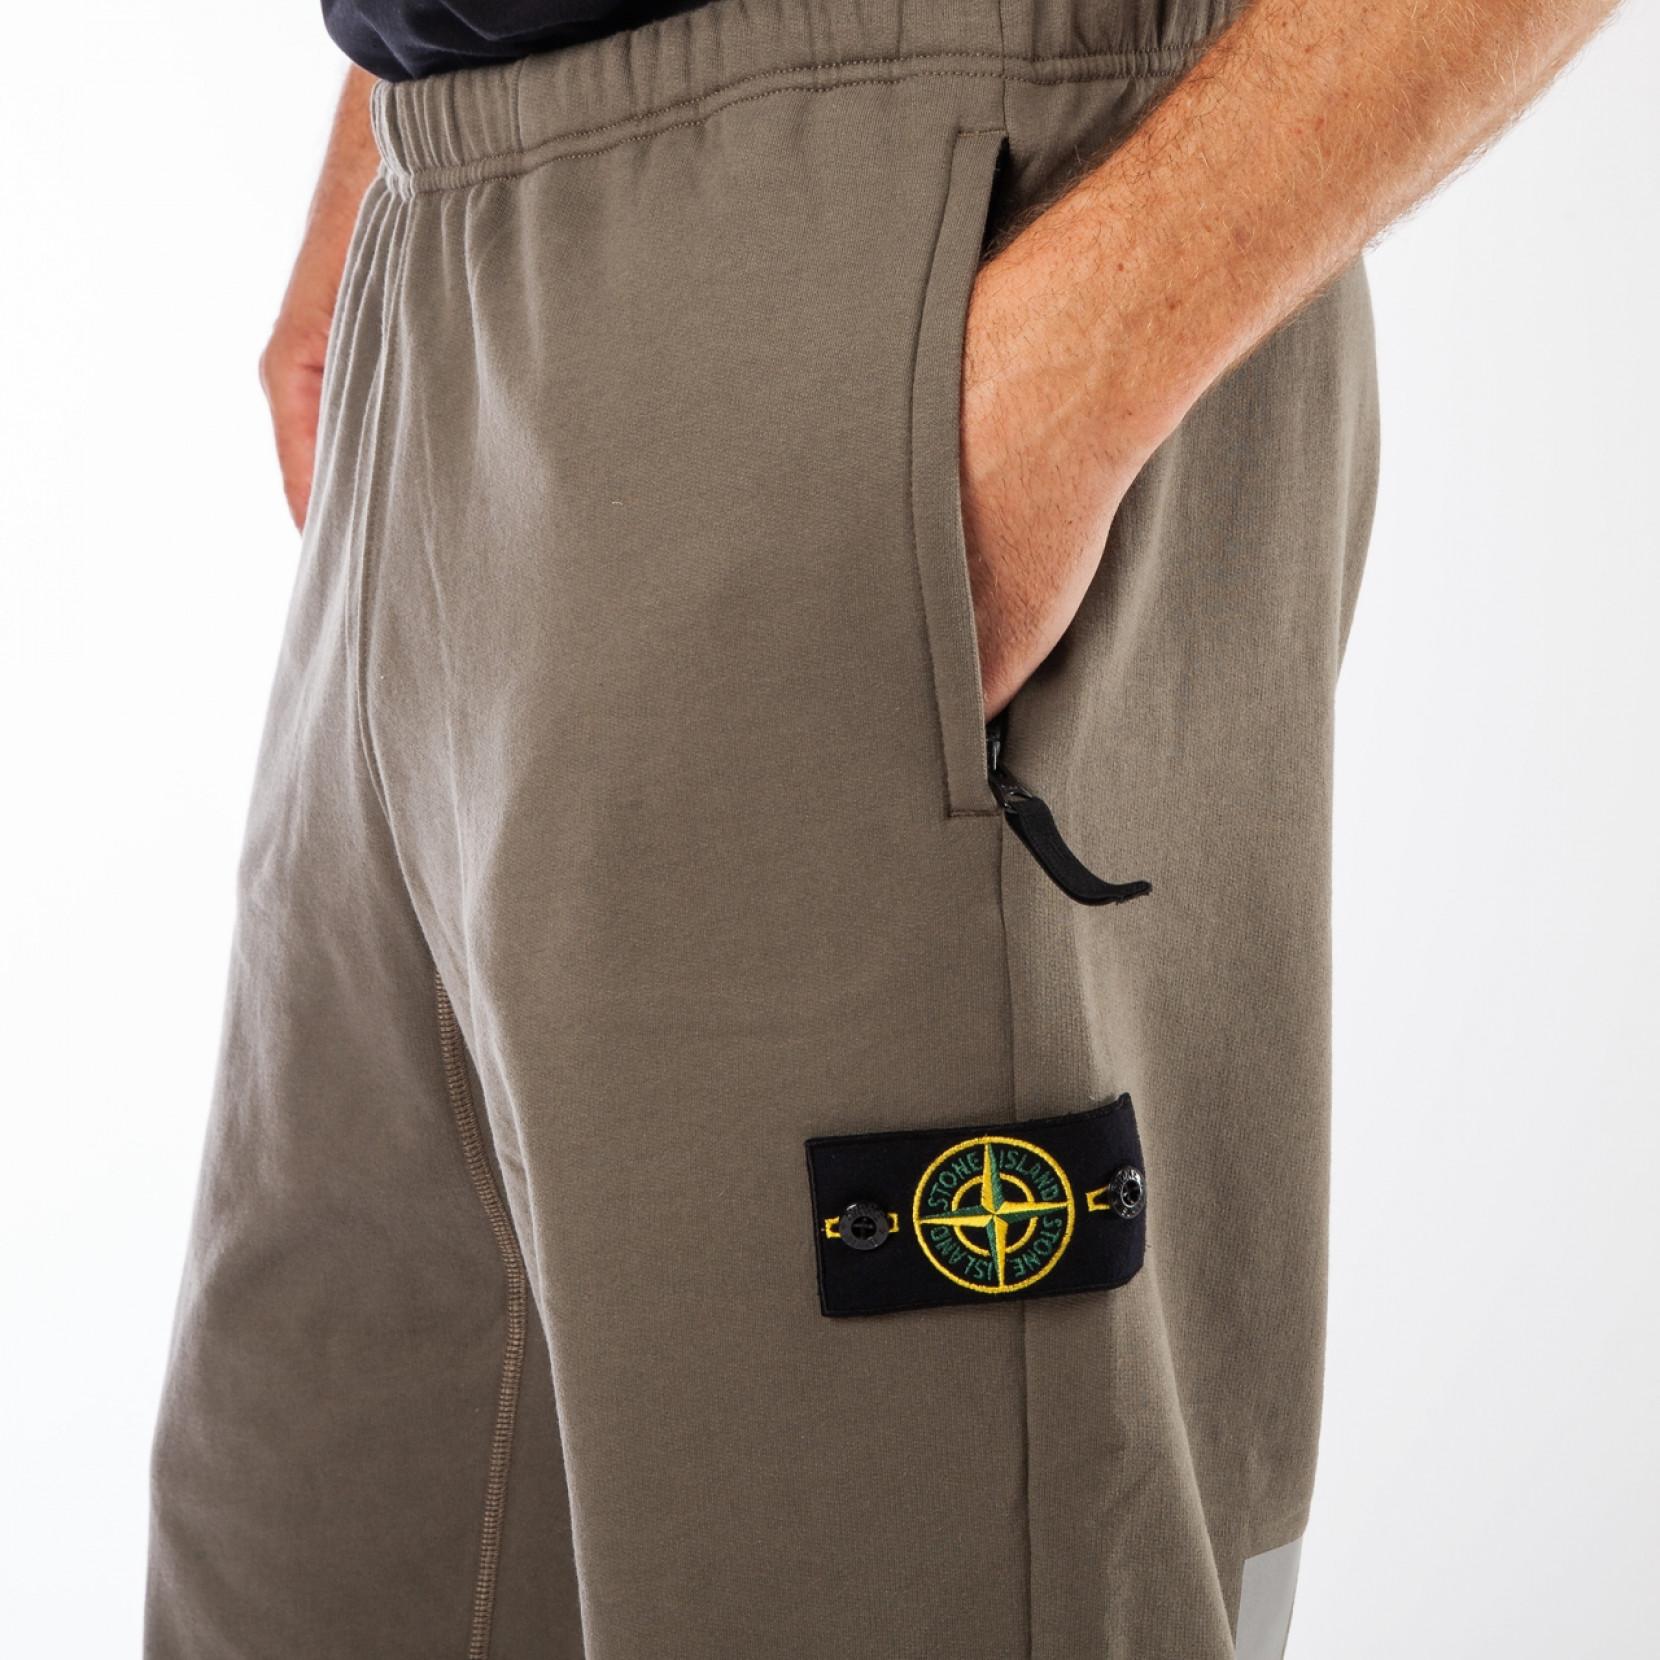 Stone Island Reflective Fleece Pants in Olive (Green) for Men - Lyst